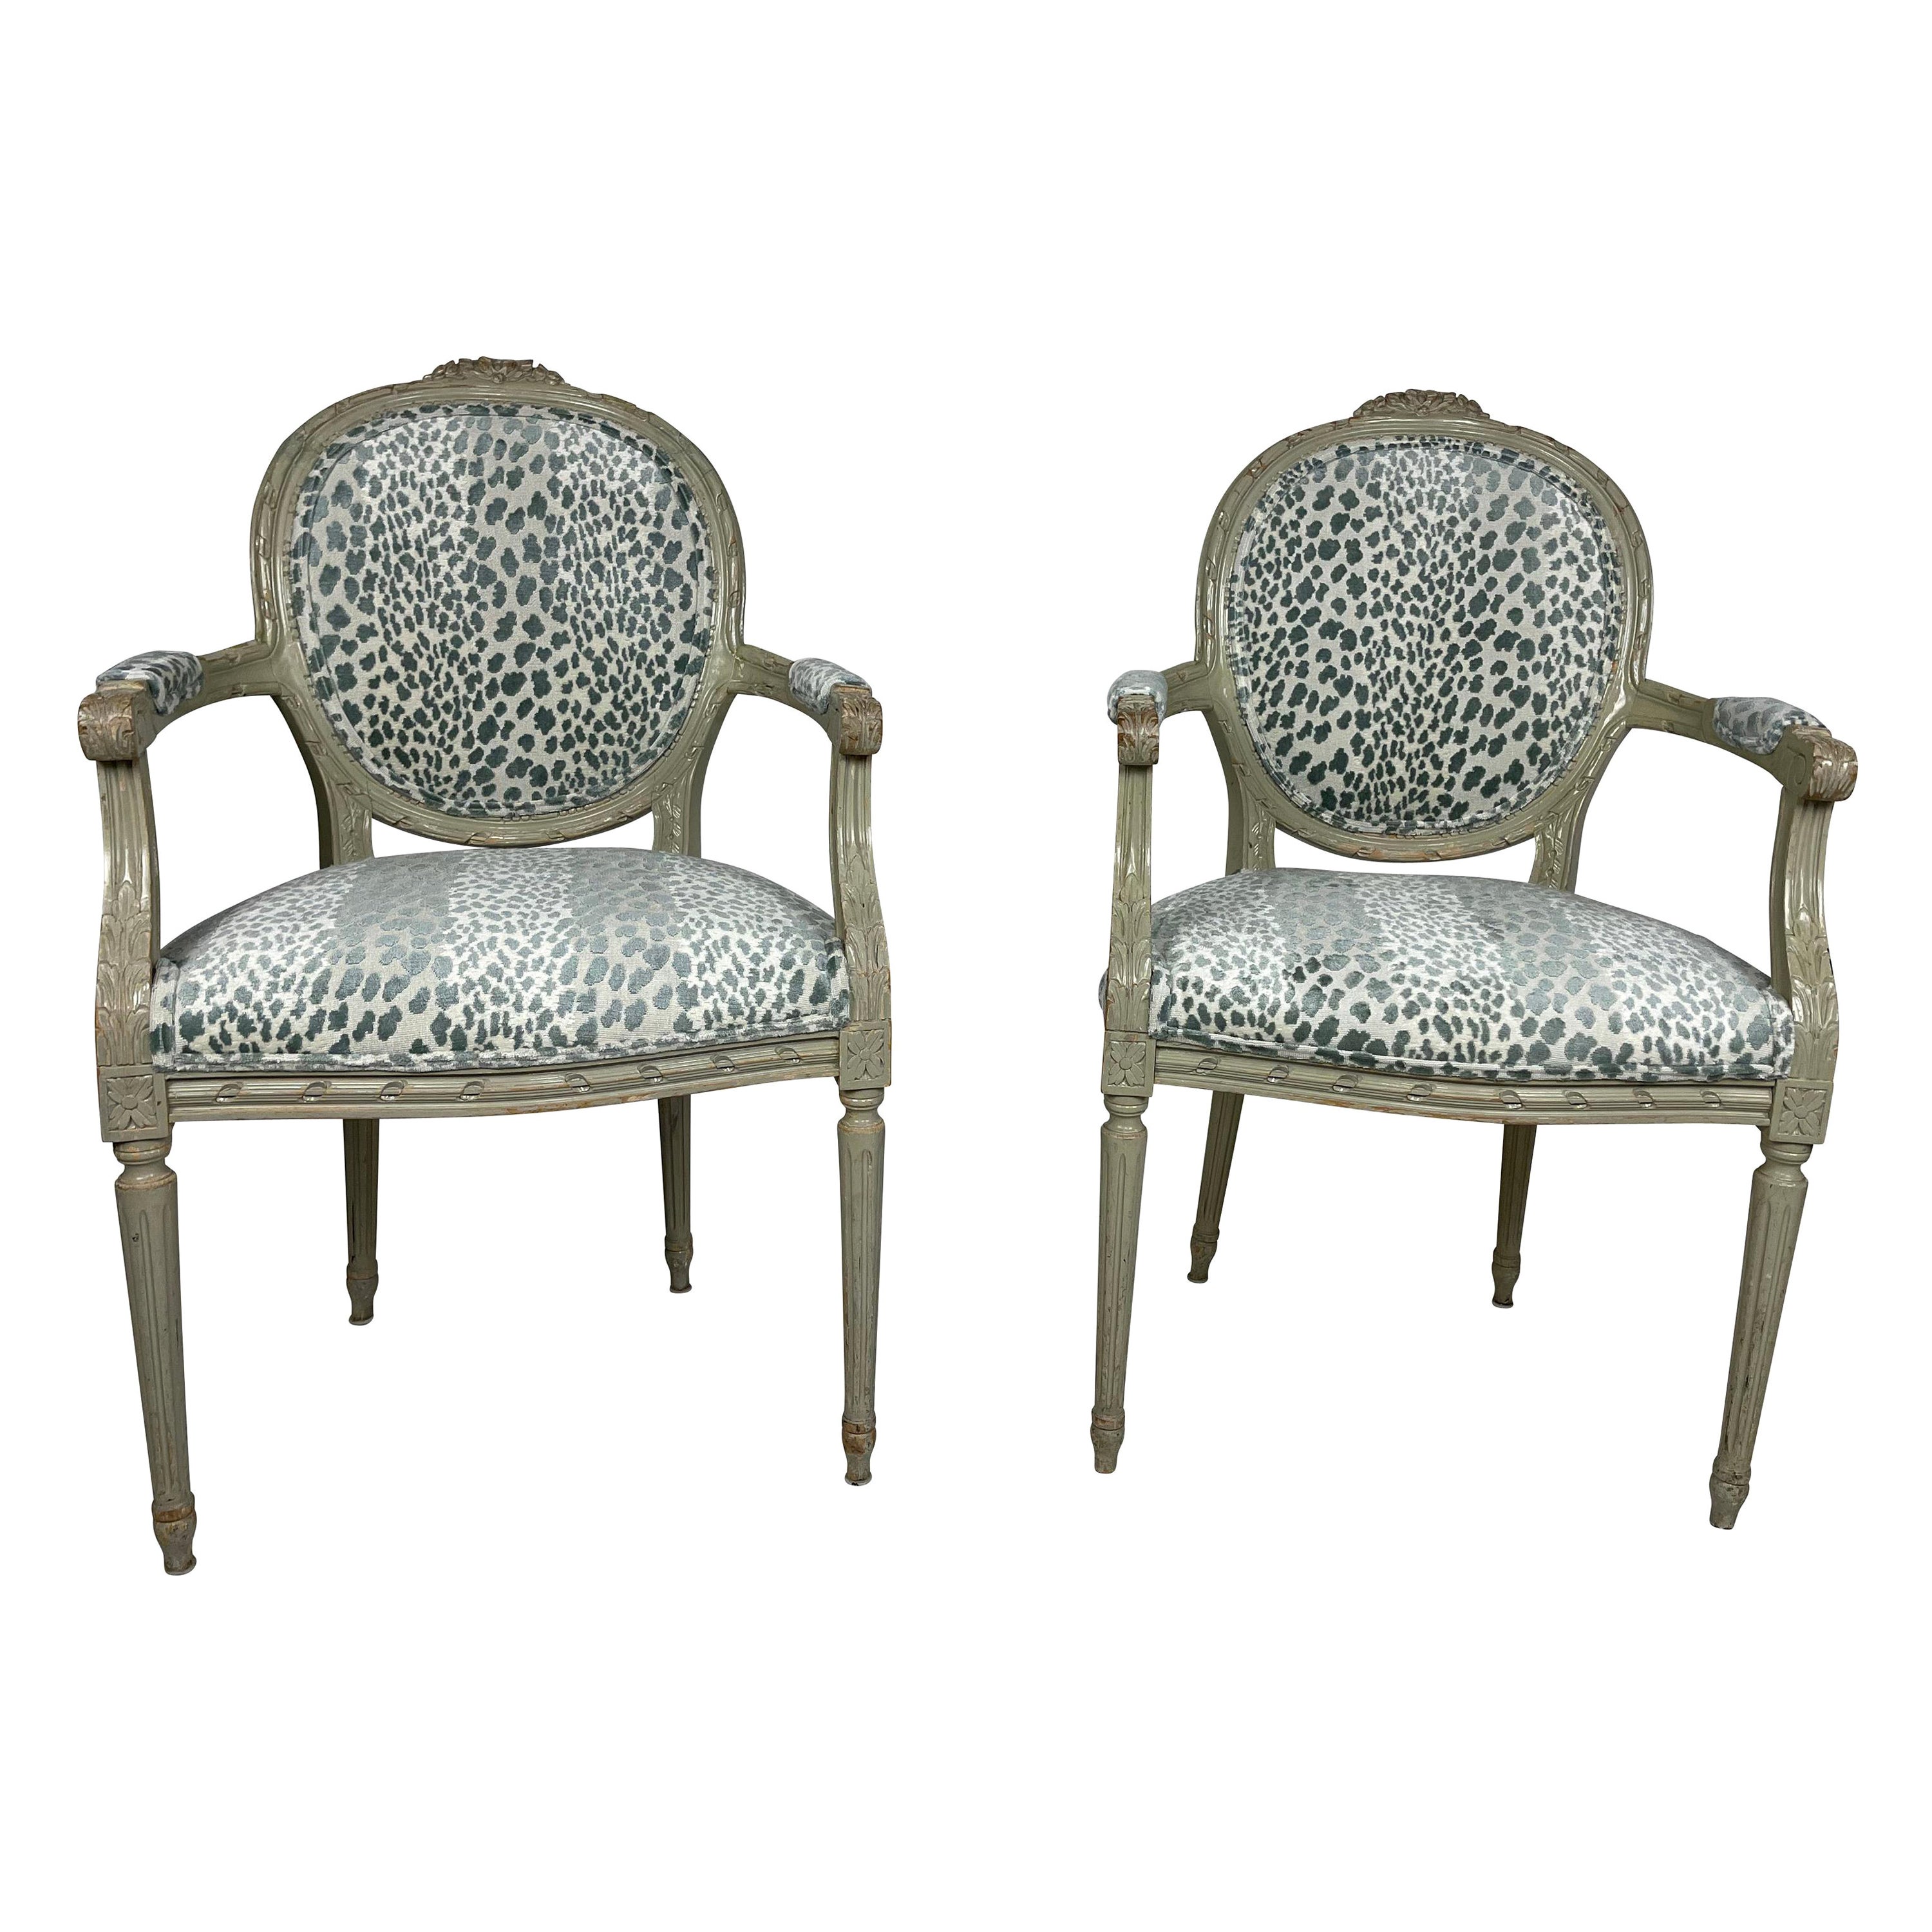 Pair of Louis XVI Style Chairs Blue/Green Animal Print Velvet Fabric For Sale